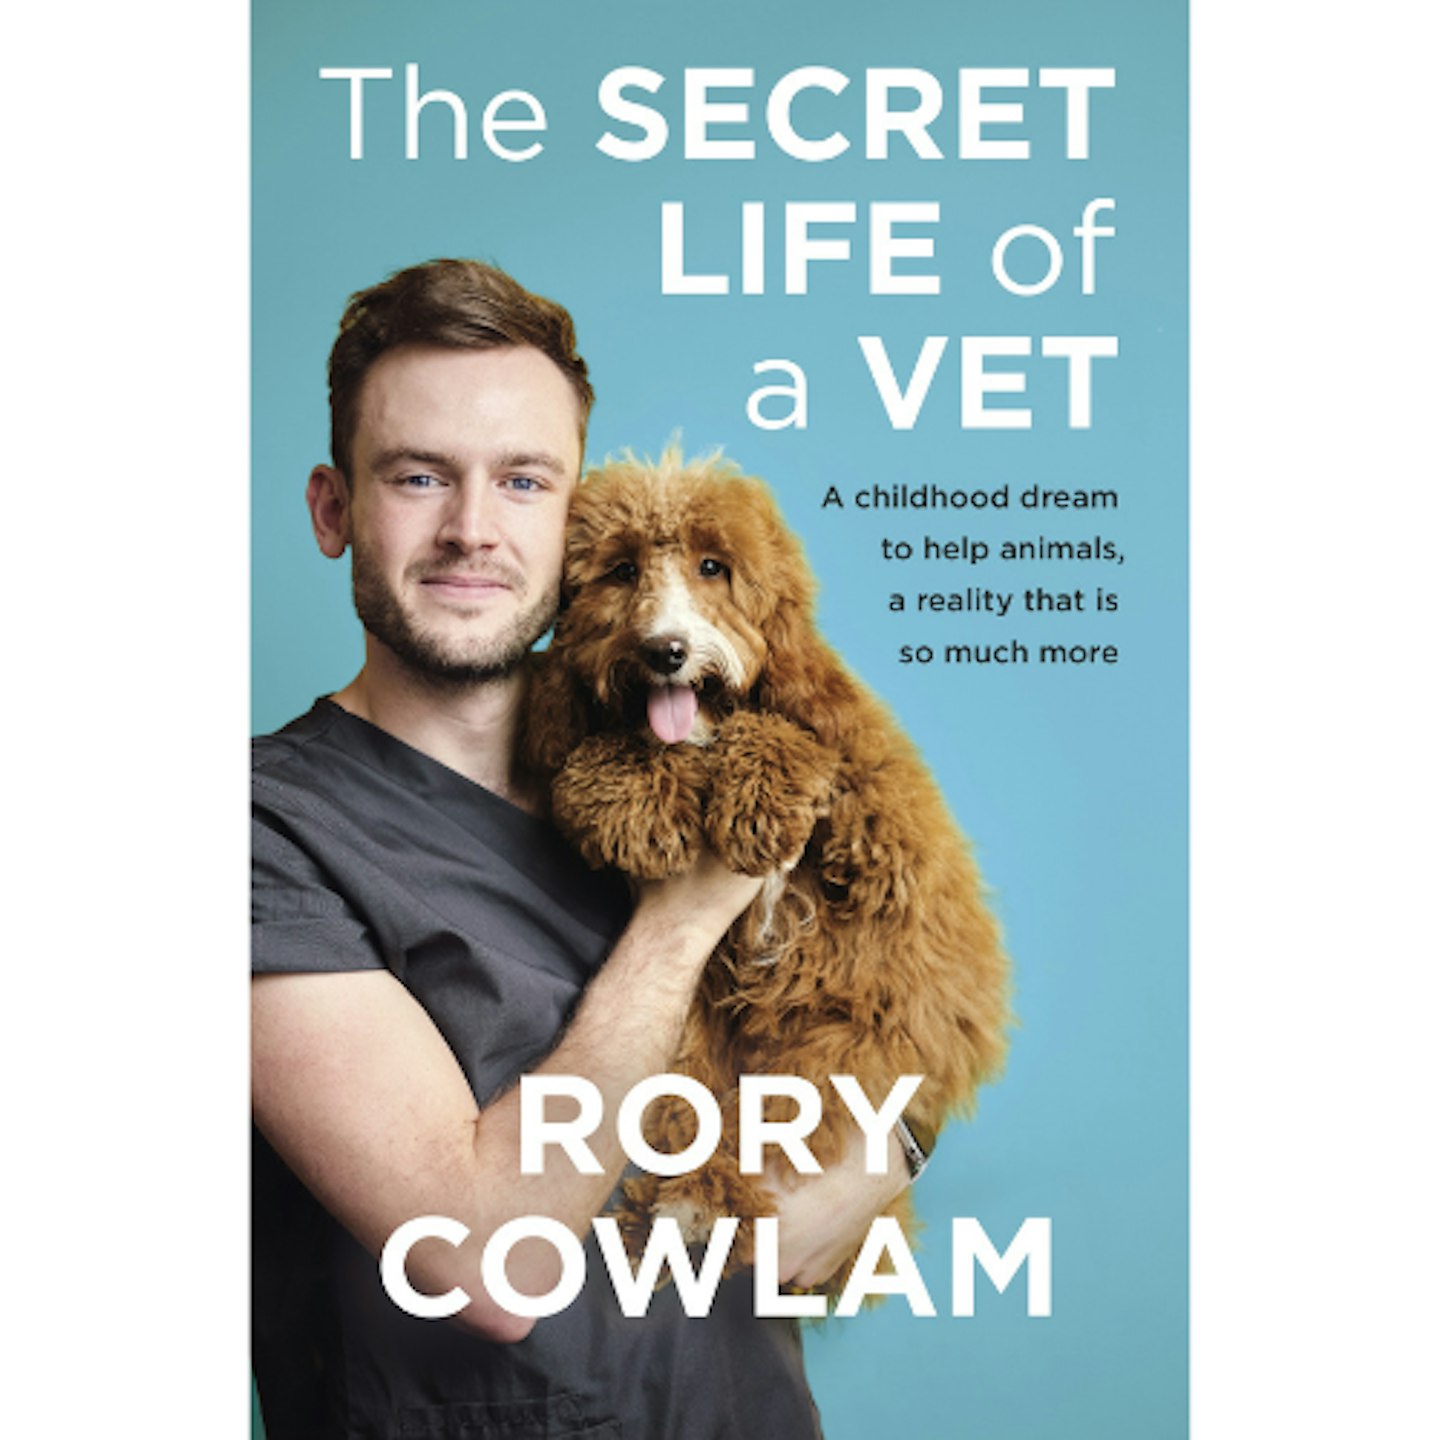 The Secret Life Of A Vet by Dr Rory Cowlam